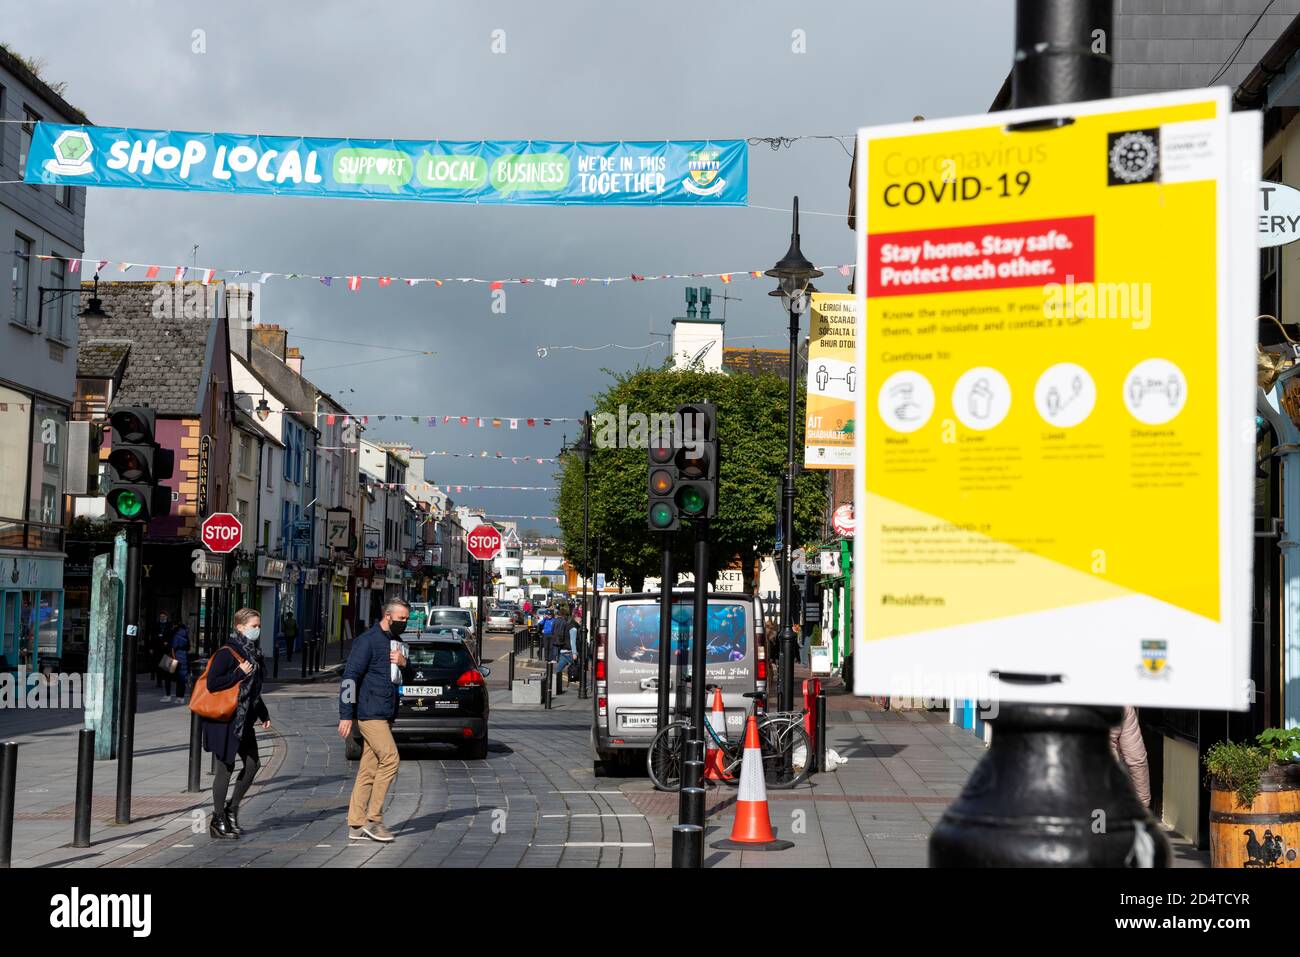 People wearing masks under positive sign for shopping locally to support the local business during Covid 19 pandemic outbreak in Killarney Ireland Stock Photo